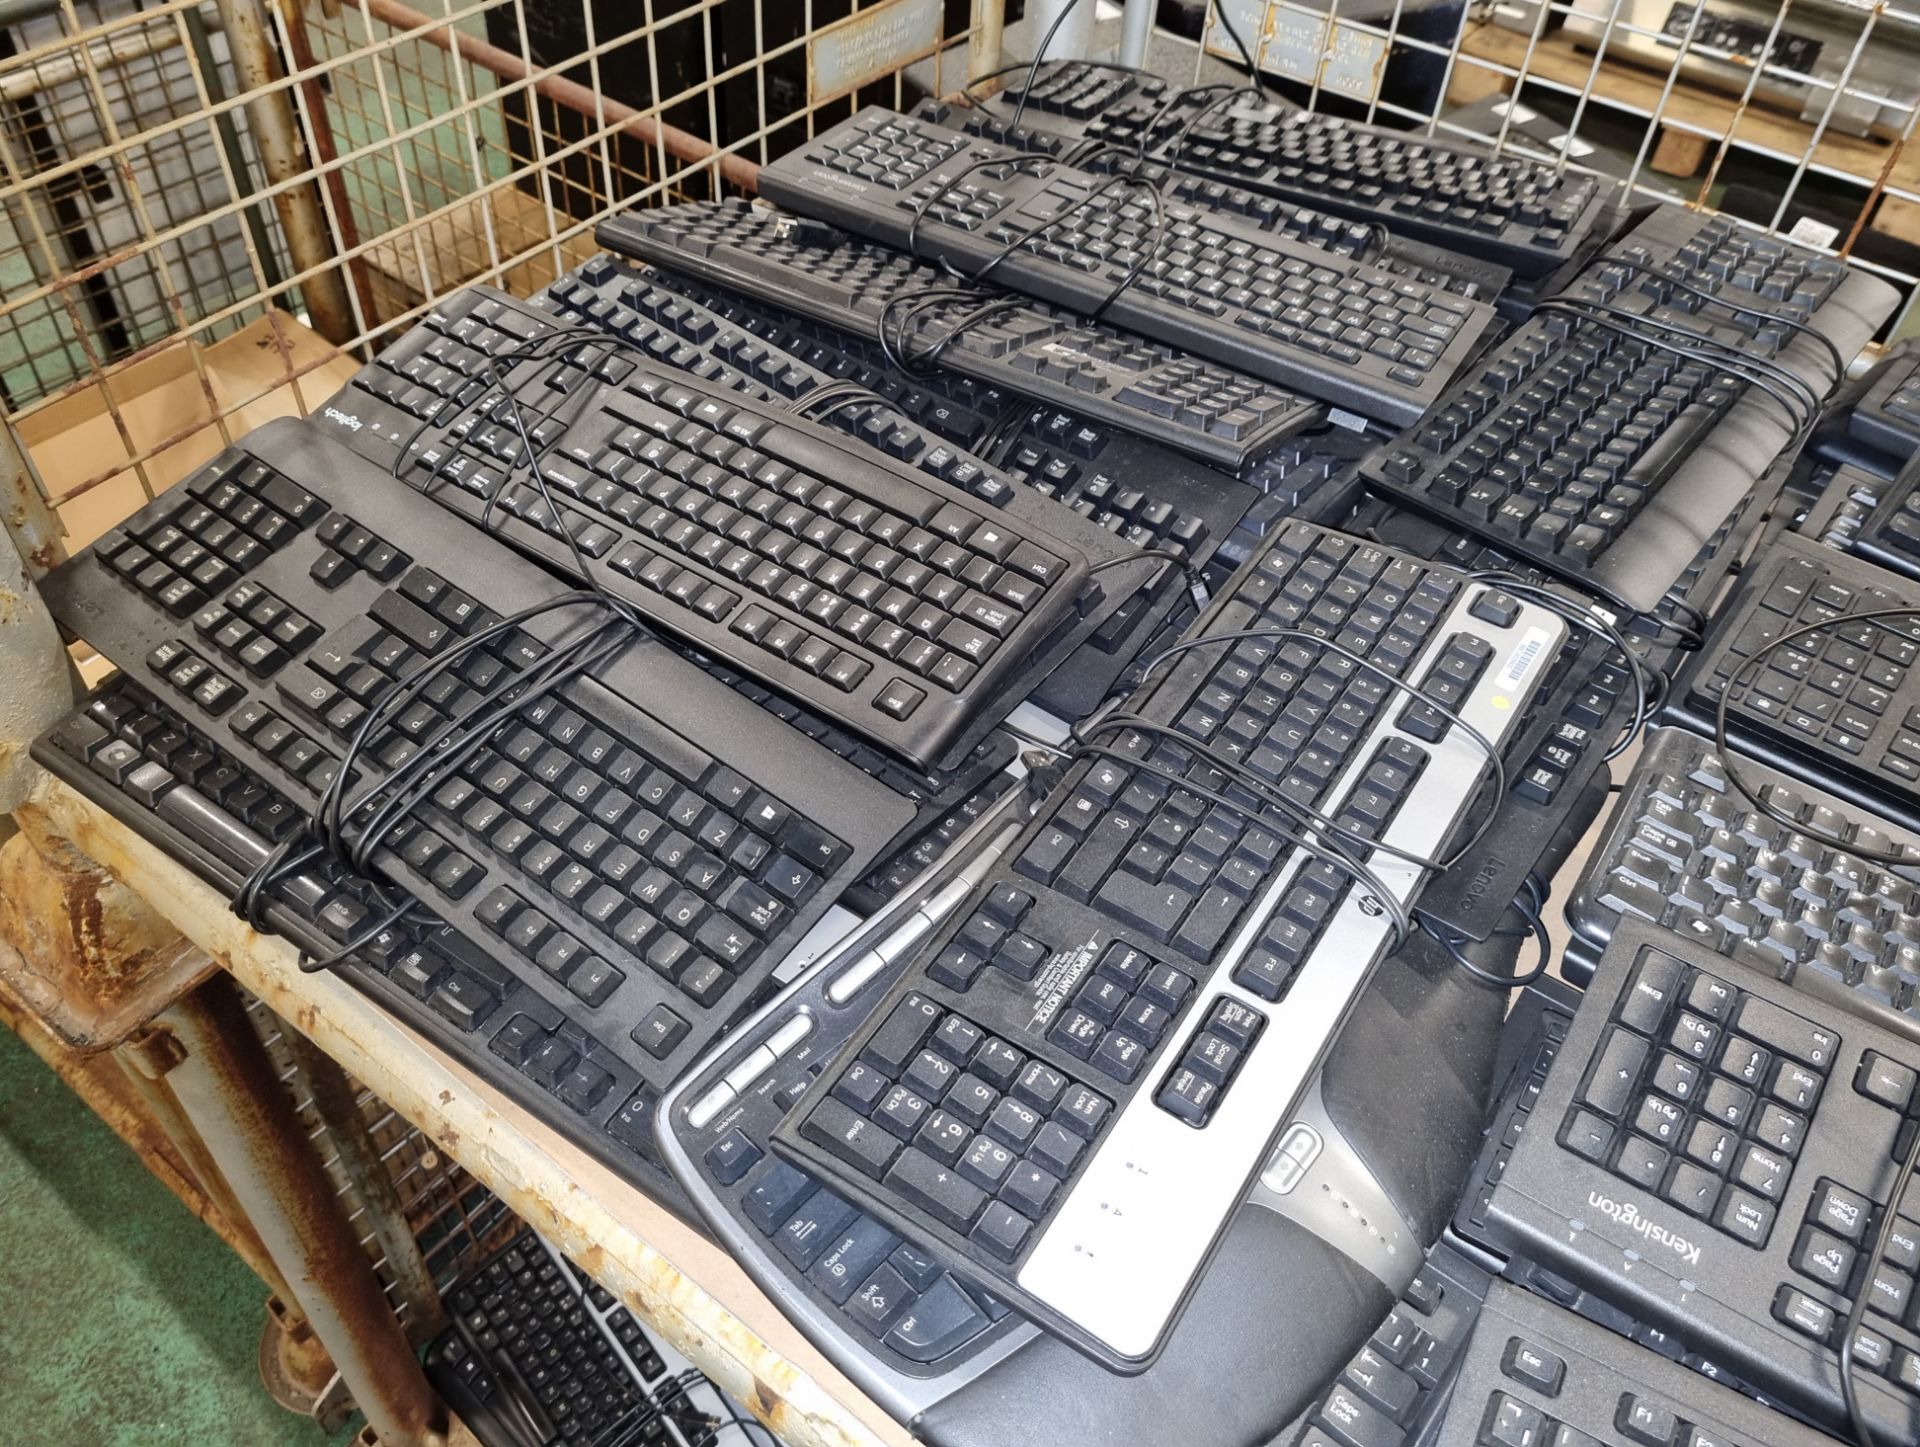 90x computer keyboards of multiple makes - HP, Logitech and Kensington - Image 2 of 5